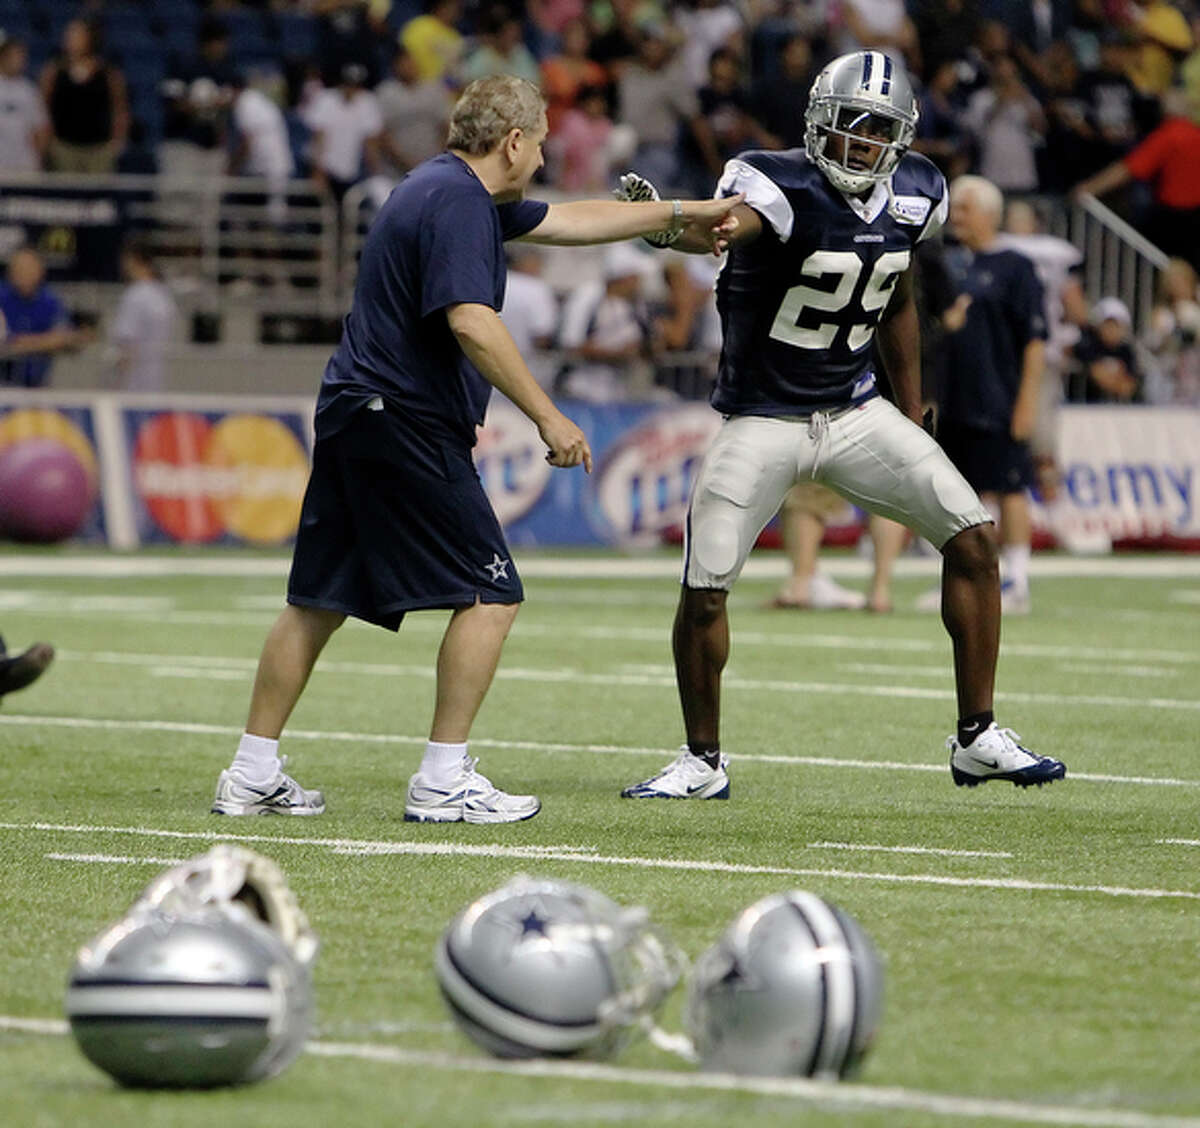 UTSA's Teddy Williams (29) gets an after-practice tutoring session with secondary coach Dave Campo at the Dallas Cowboys training camp at the Alamodome Thursday